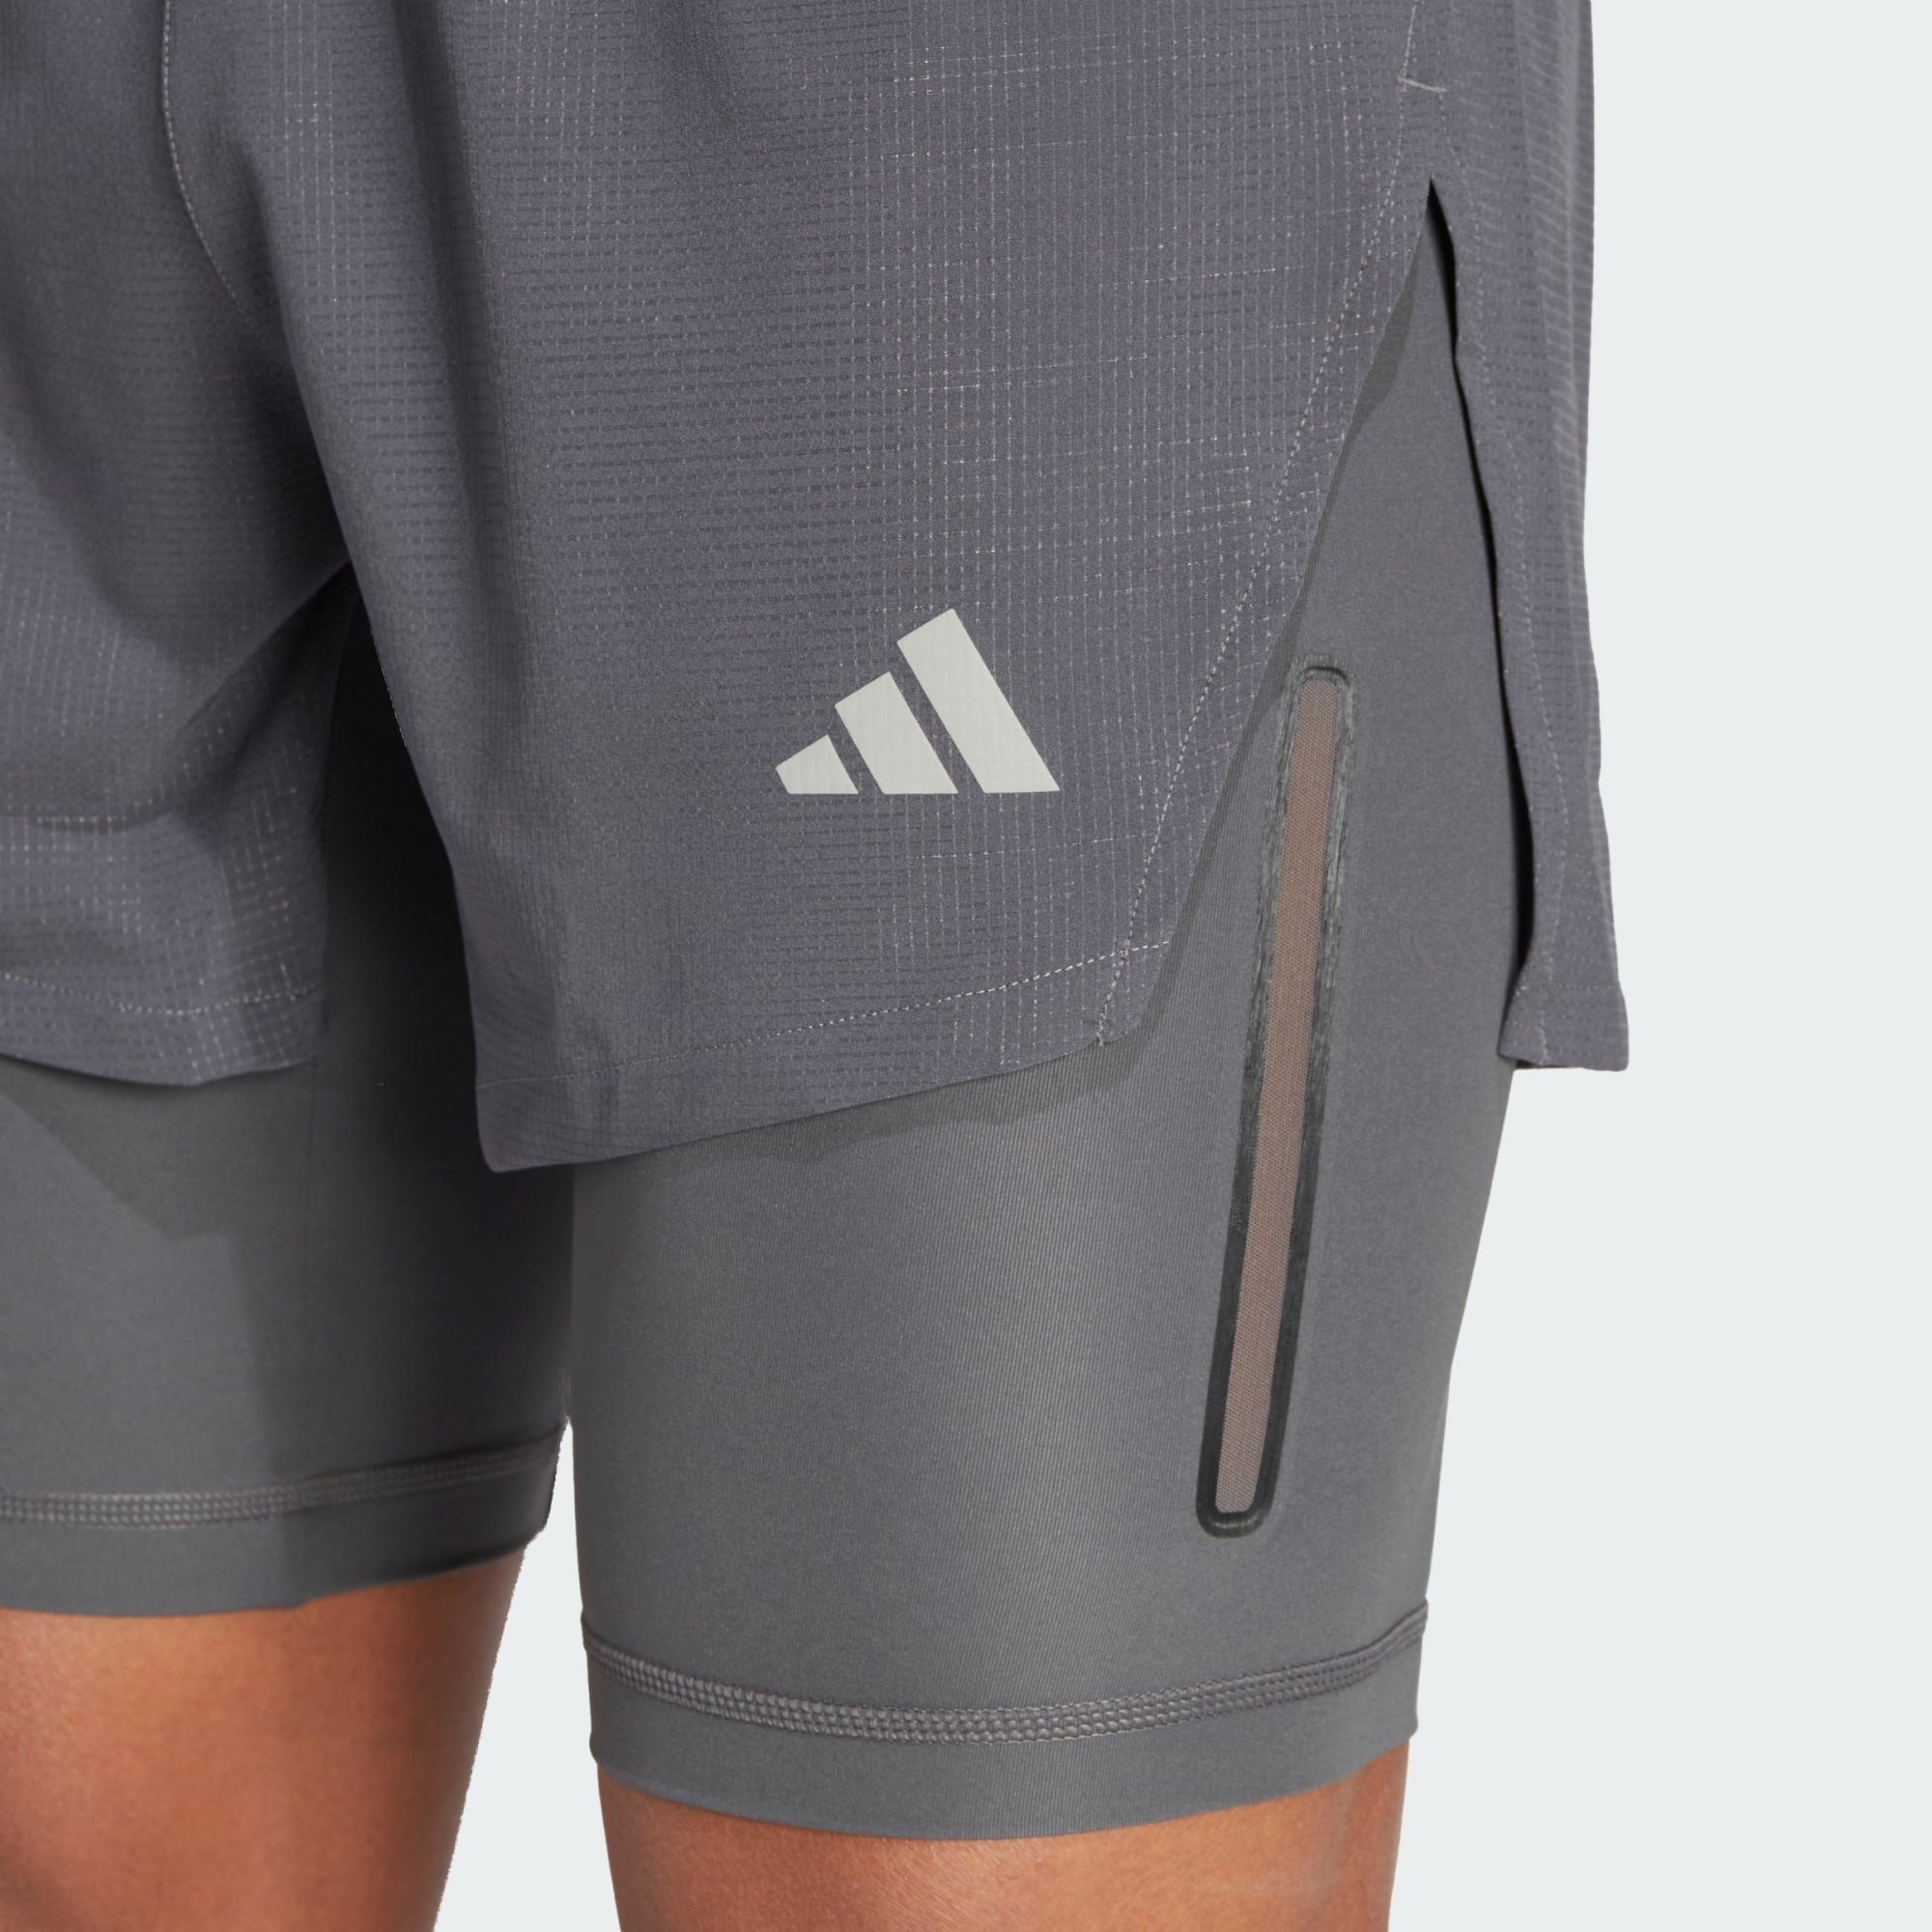 Six SHORTS HIIT Grey ELEVATED TRAINING Performance HEAT.RDY adidas 2-IN-1 2-in-1-Shorts